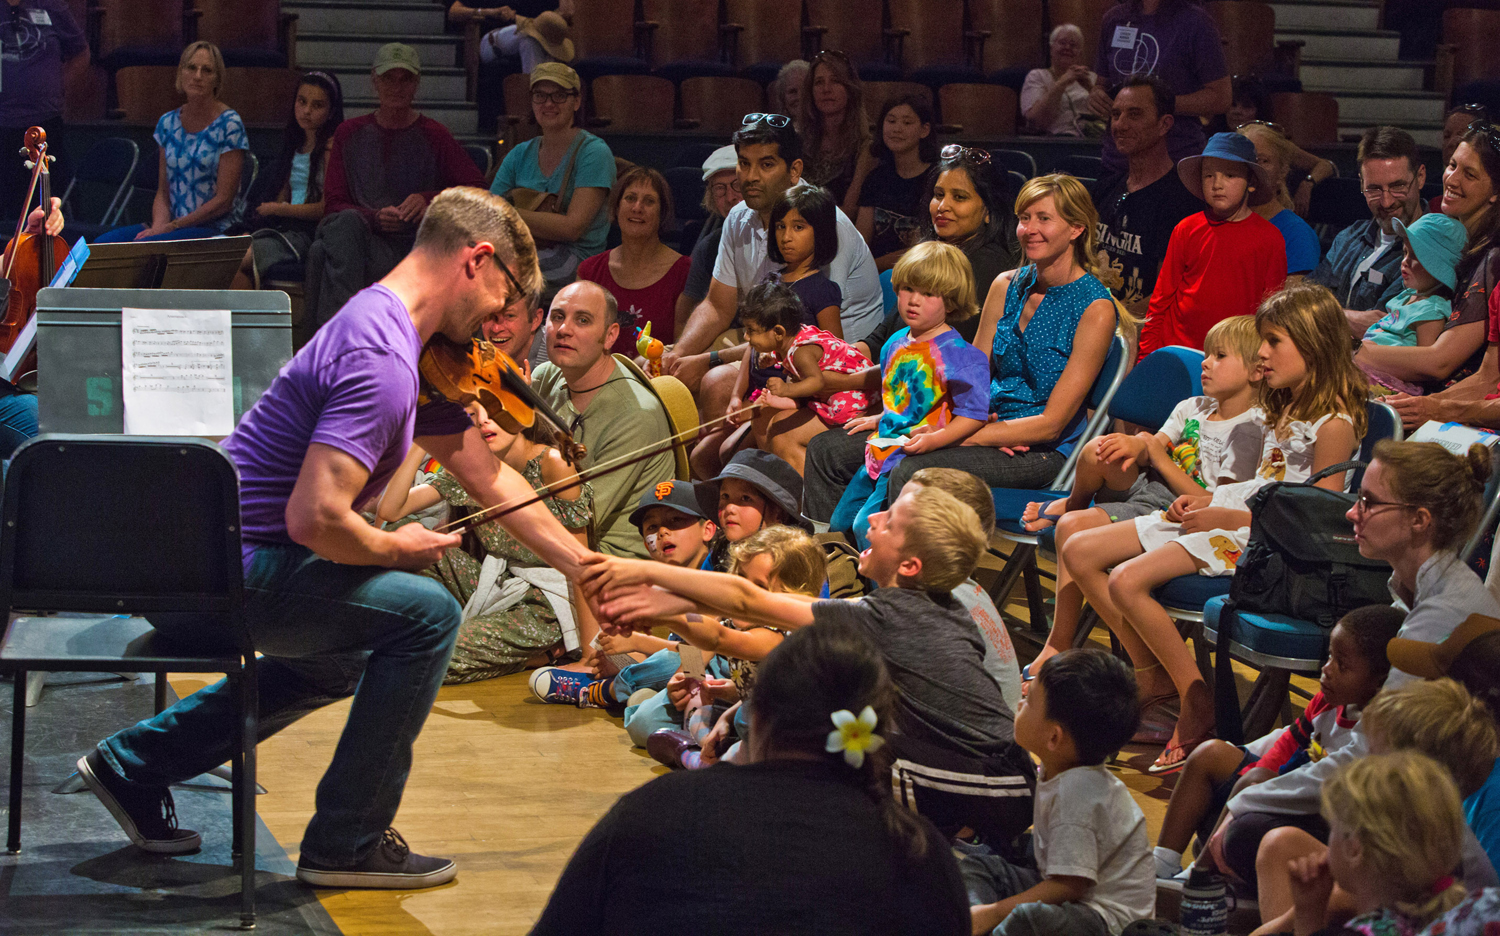 Violinist Ben Tomkins makes a connection with young Free Family Concert audience member!